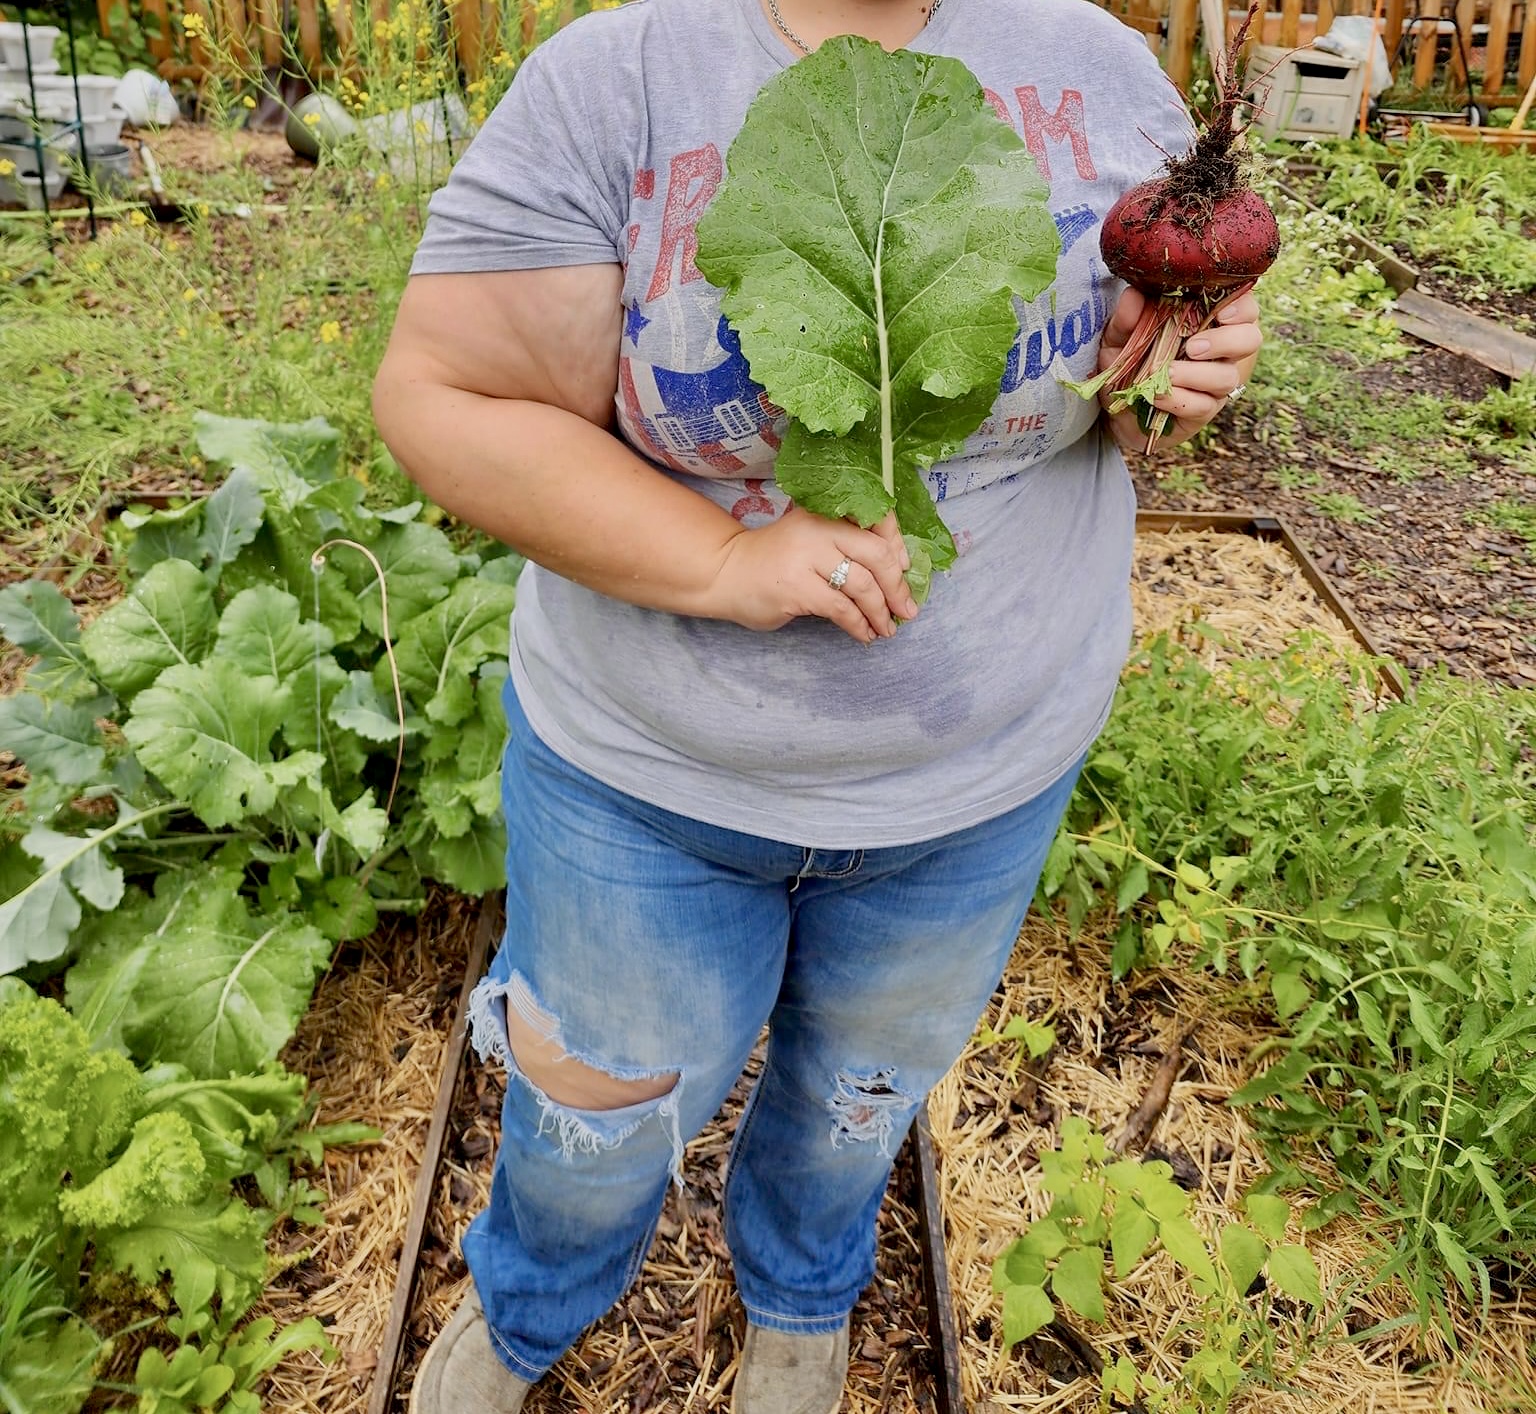 Heather holds a large Detroit Red Beet and a large leaf Kale while standing in her garden